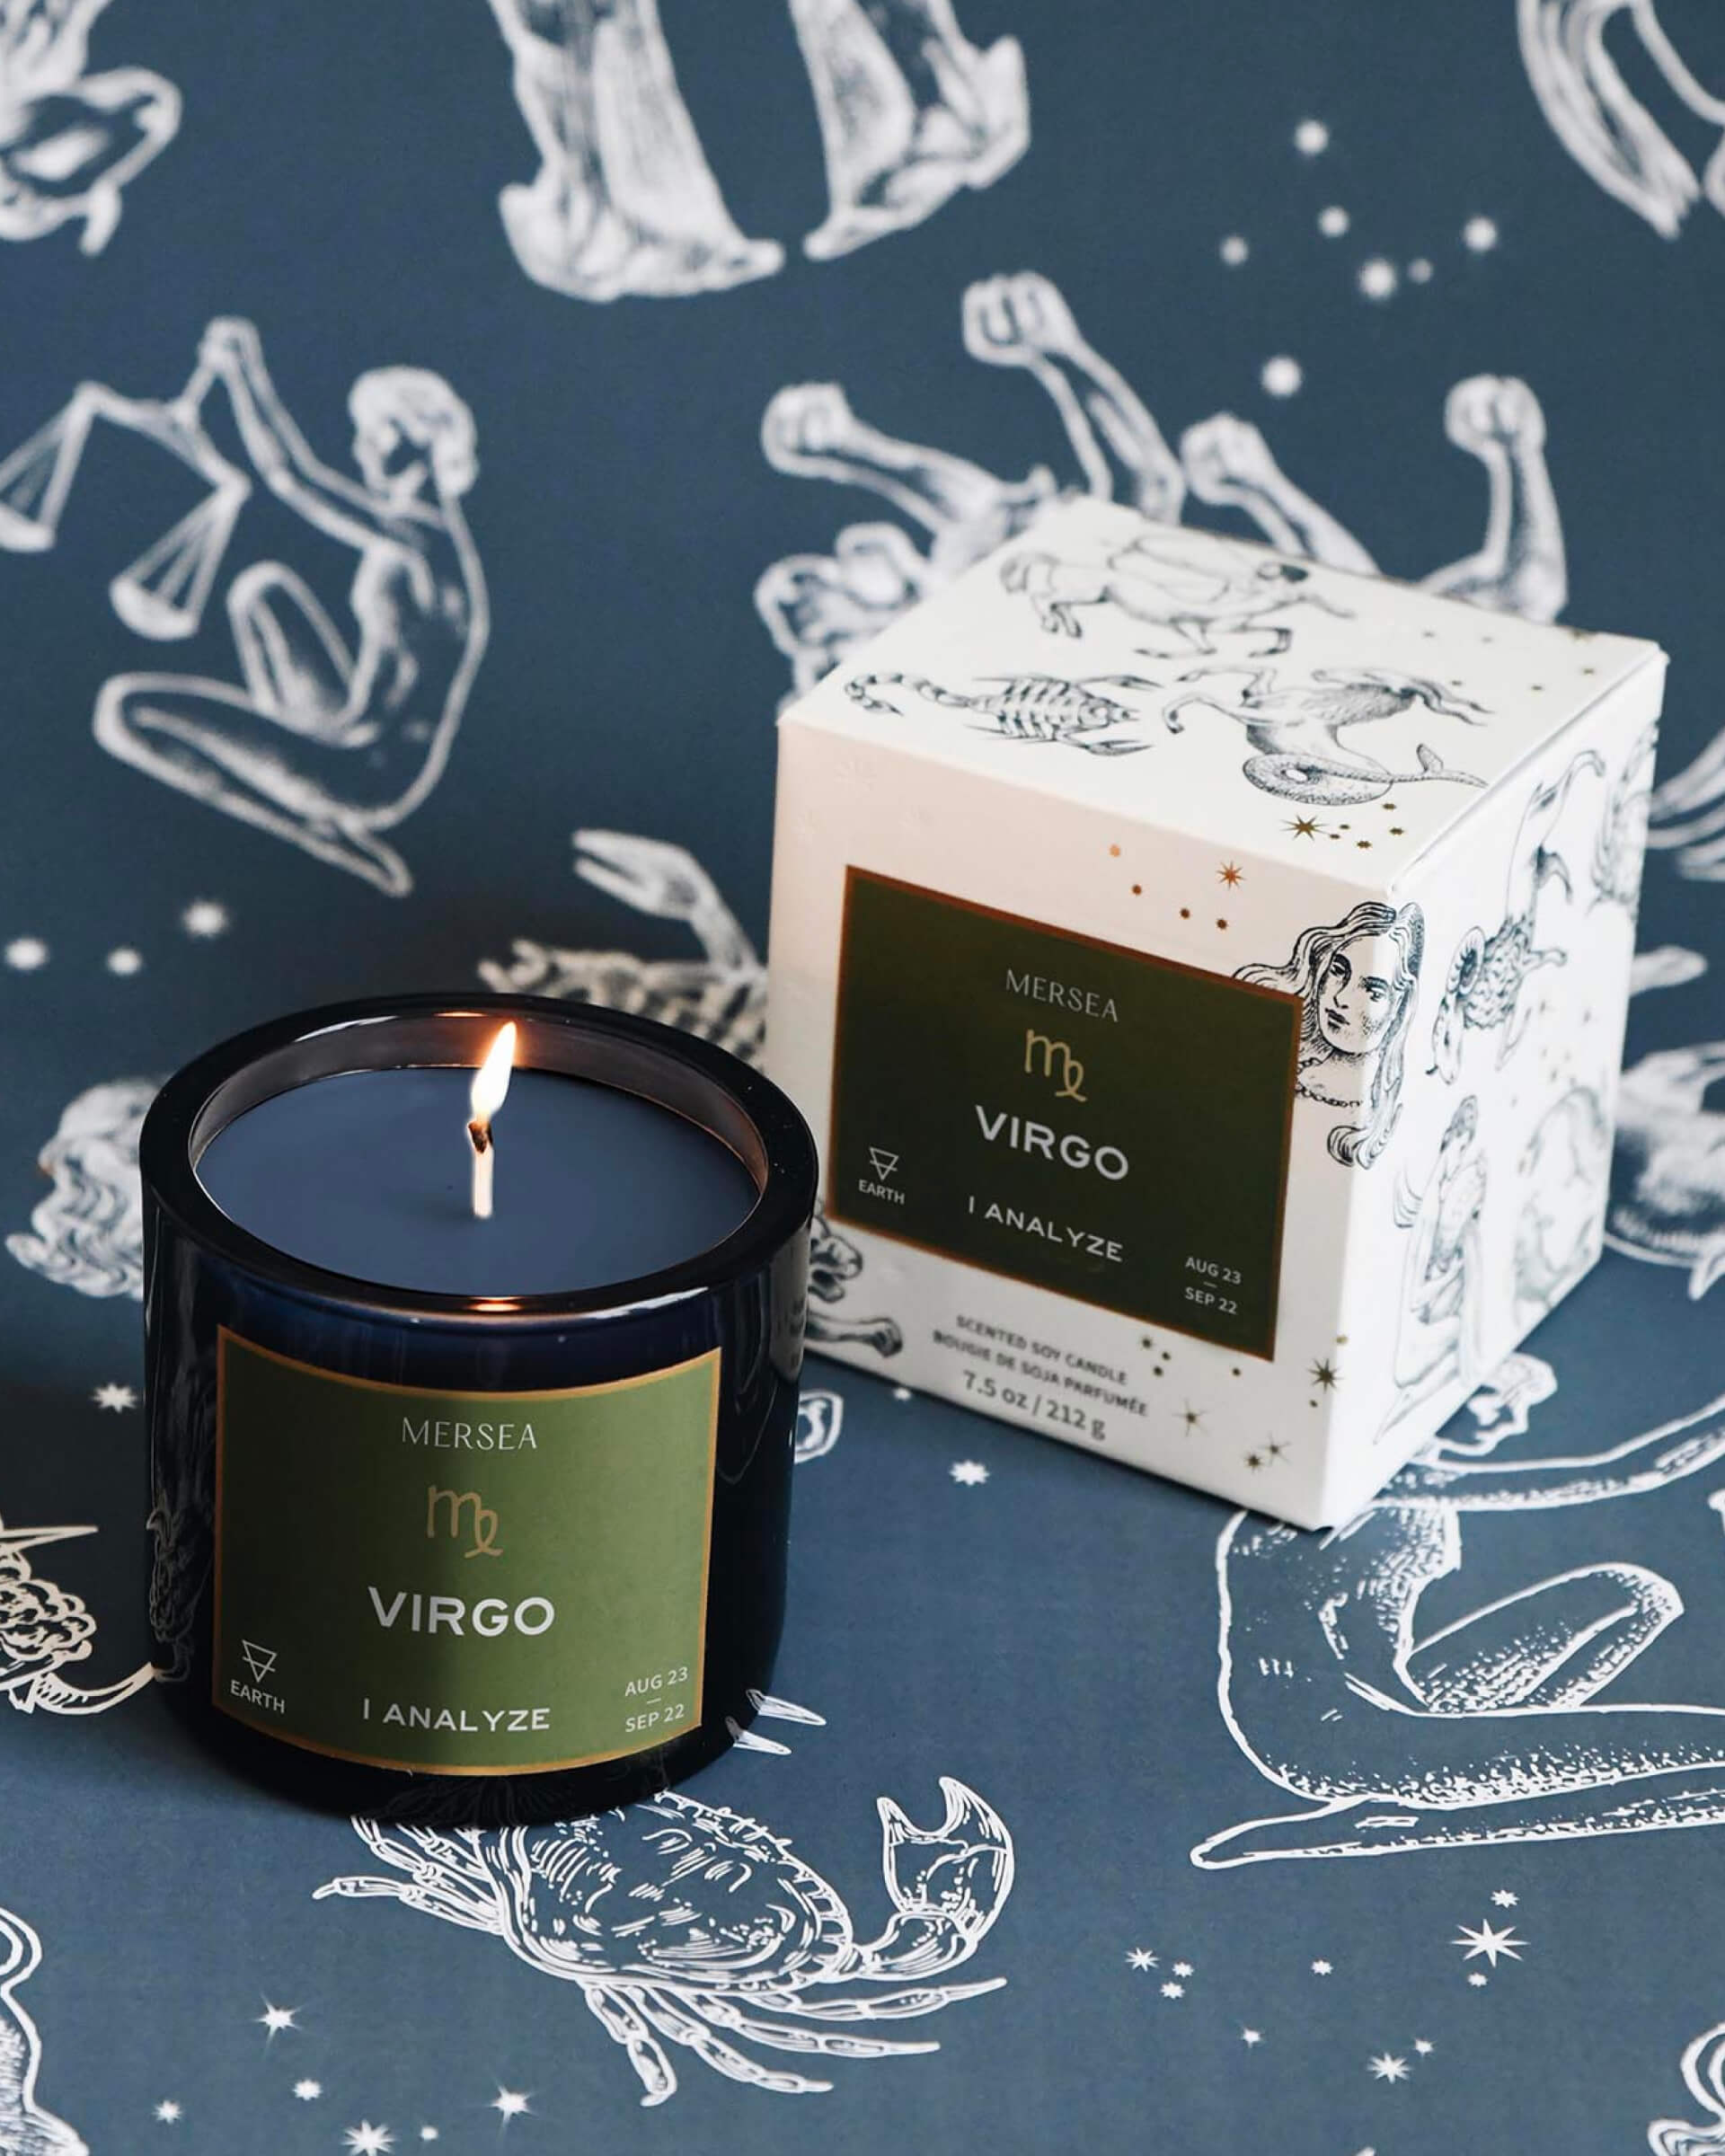 Mersea Virgo scented candle displayed beside its accompanying box, set against an astrology sign-themed backdrop